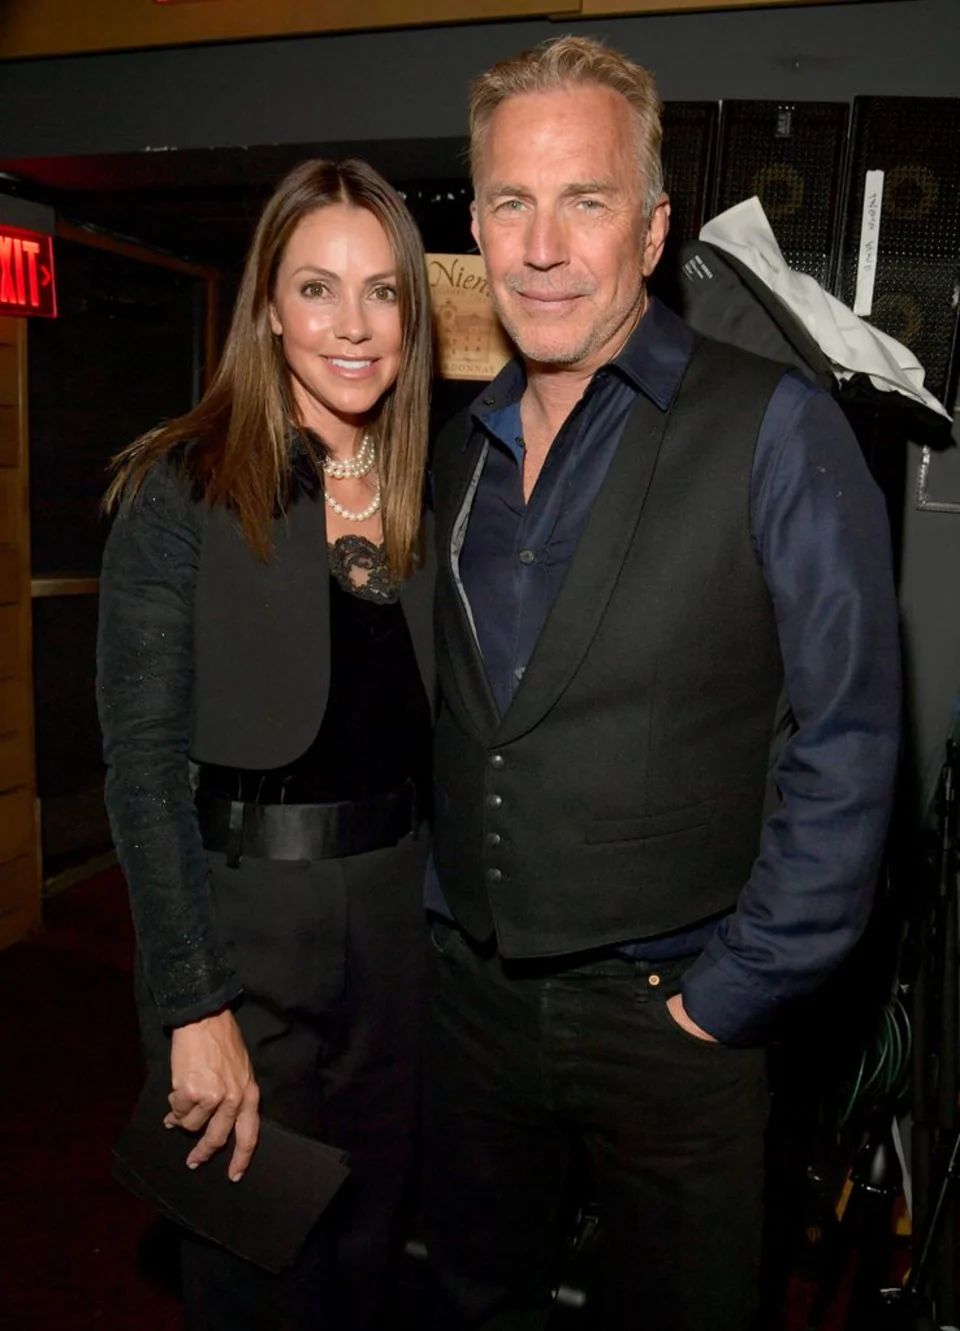 Kevin and Christine photographed as a couple at an event